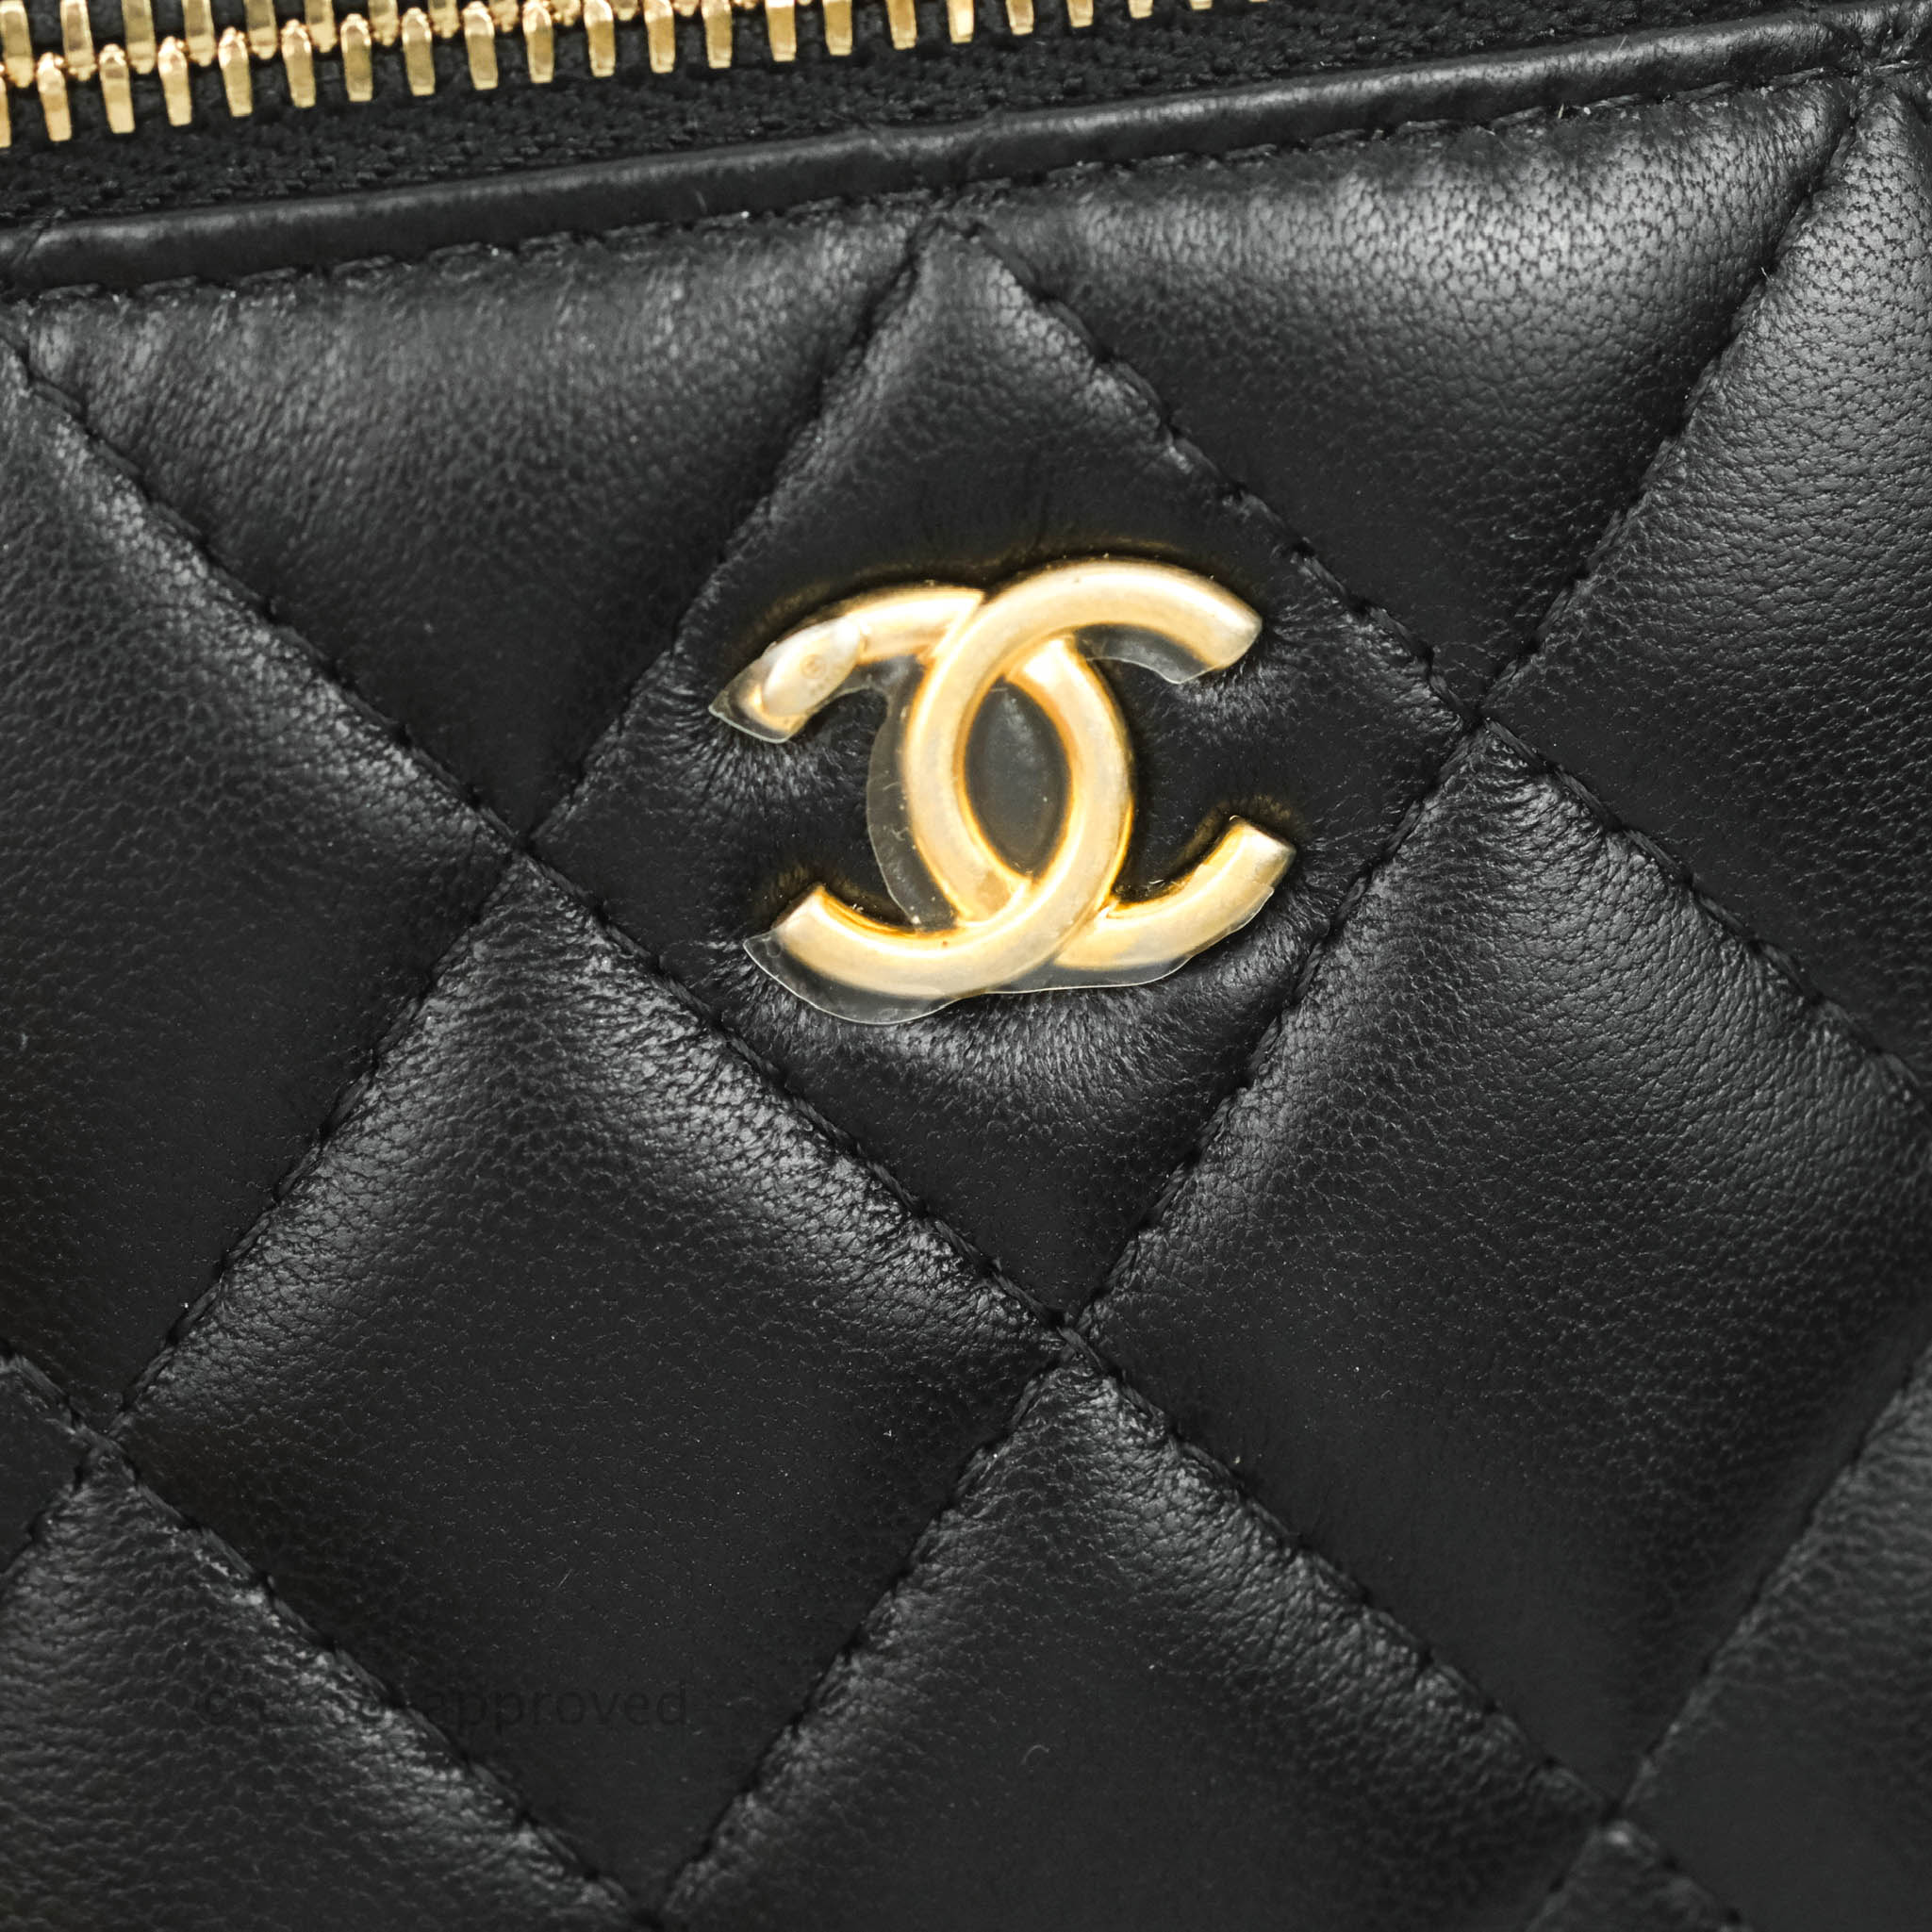 Chanel Mini Top Handle Vanity With Chain Black Lambskin Aged Gold Hard –  Coco Approved Studio